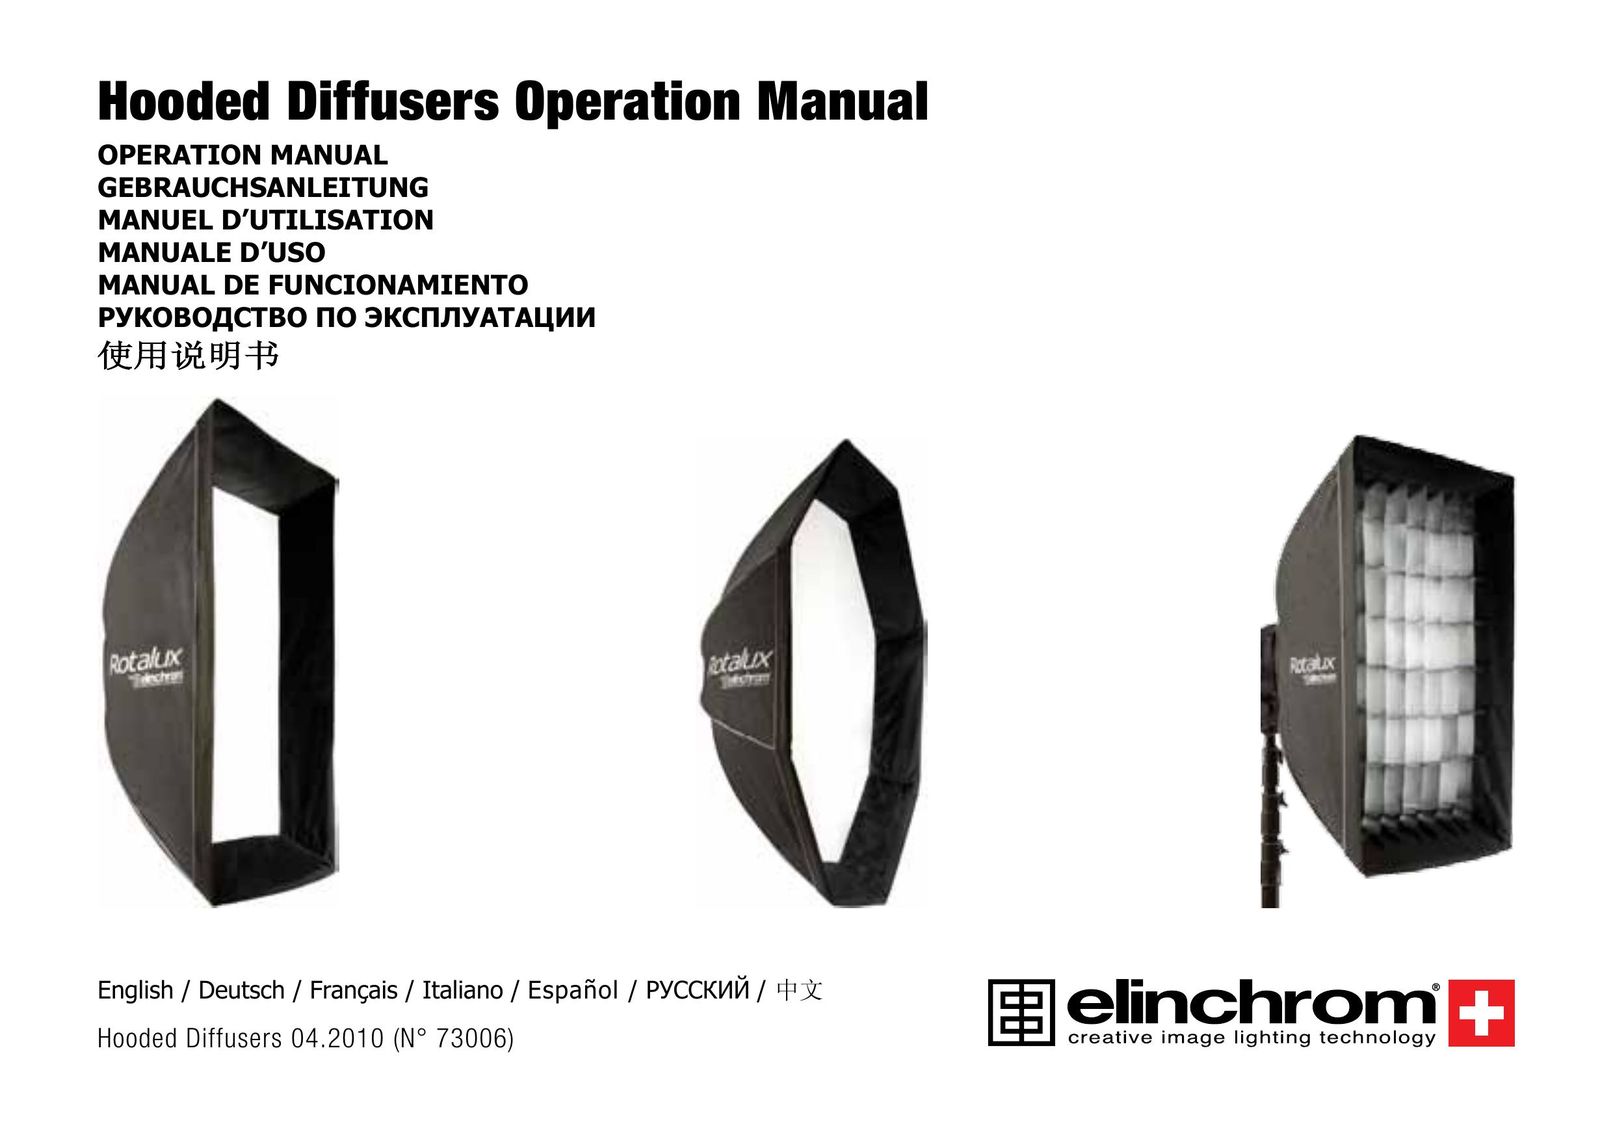 Elinchrom Hooded Diffusers Work Light User Manual